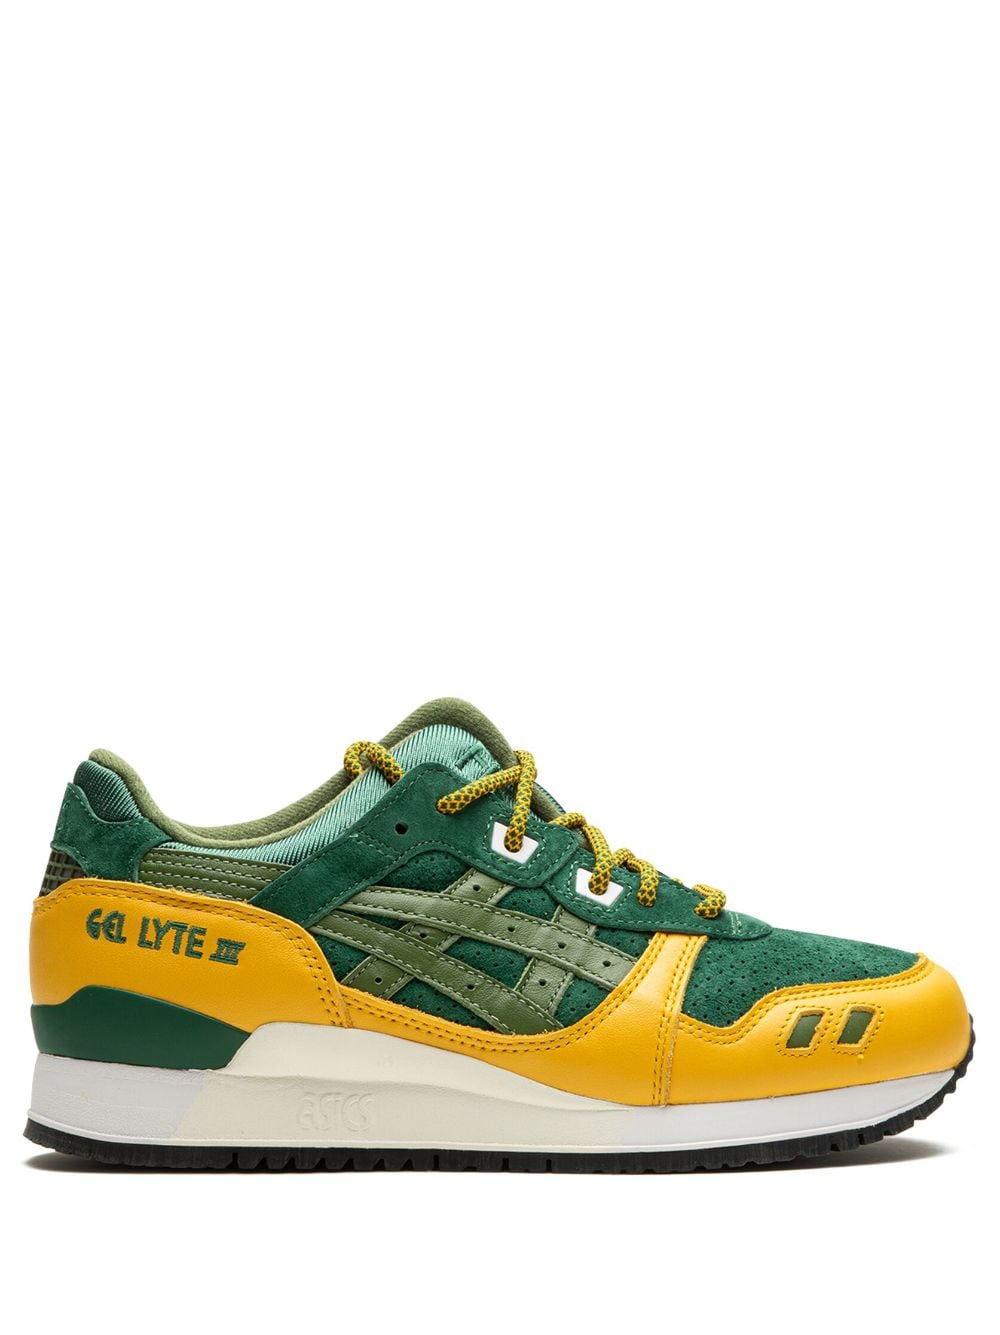 Asics Gel Lyte Iii 07 Remastered Rogue 运动鞋 In Green